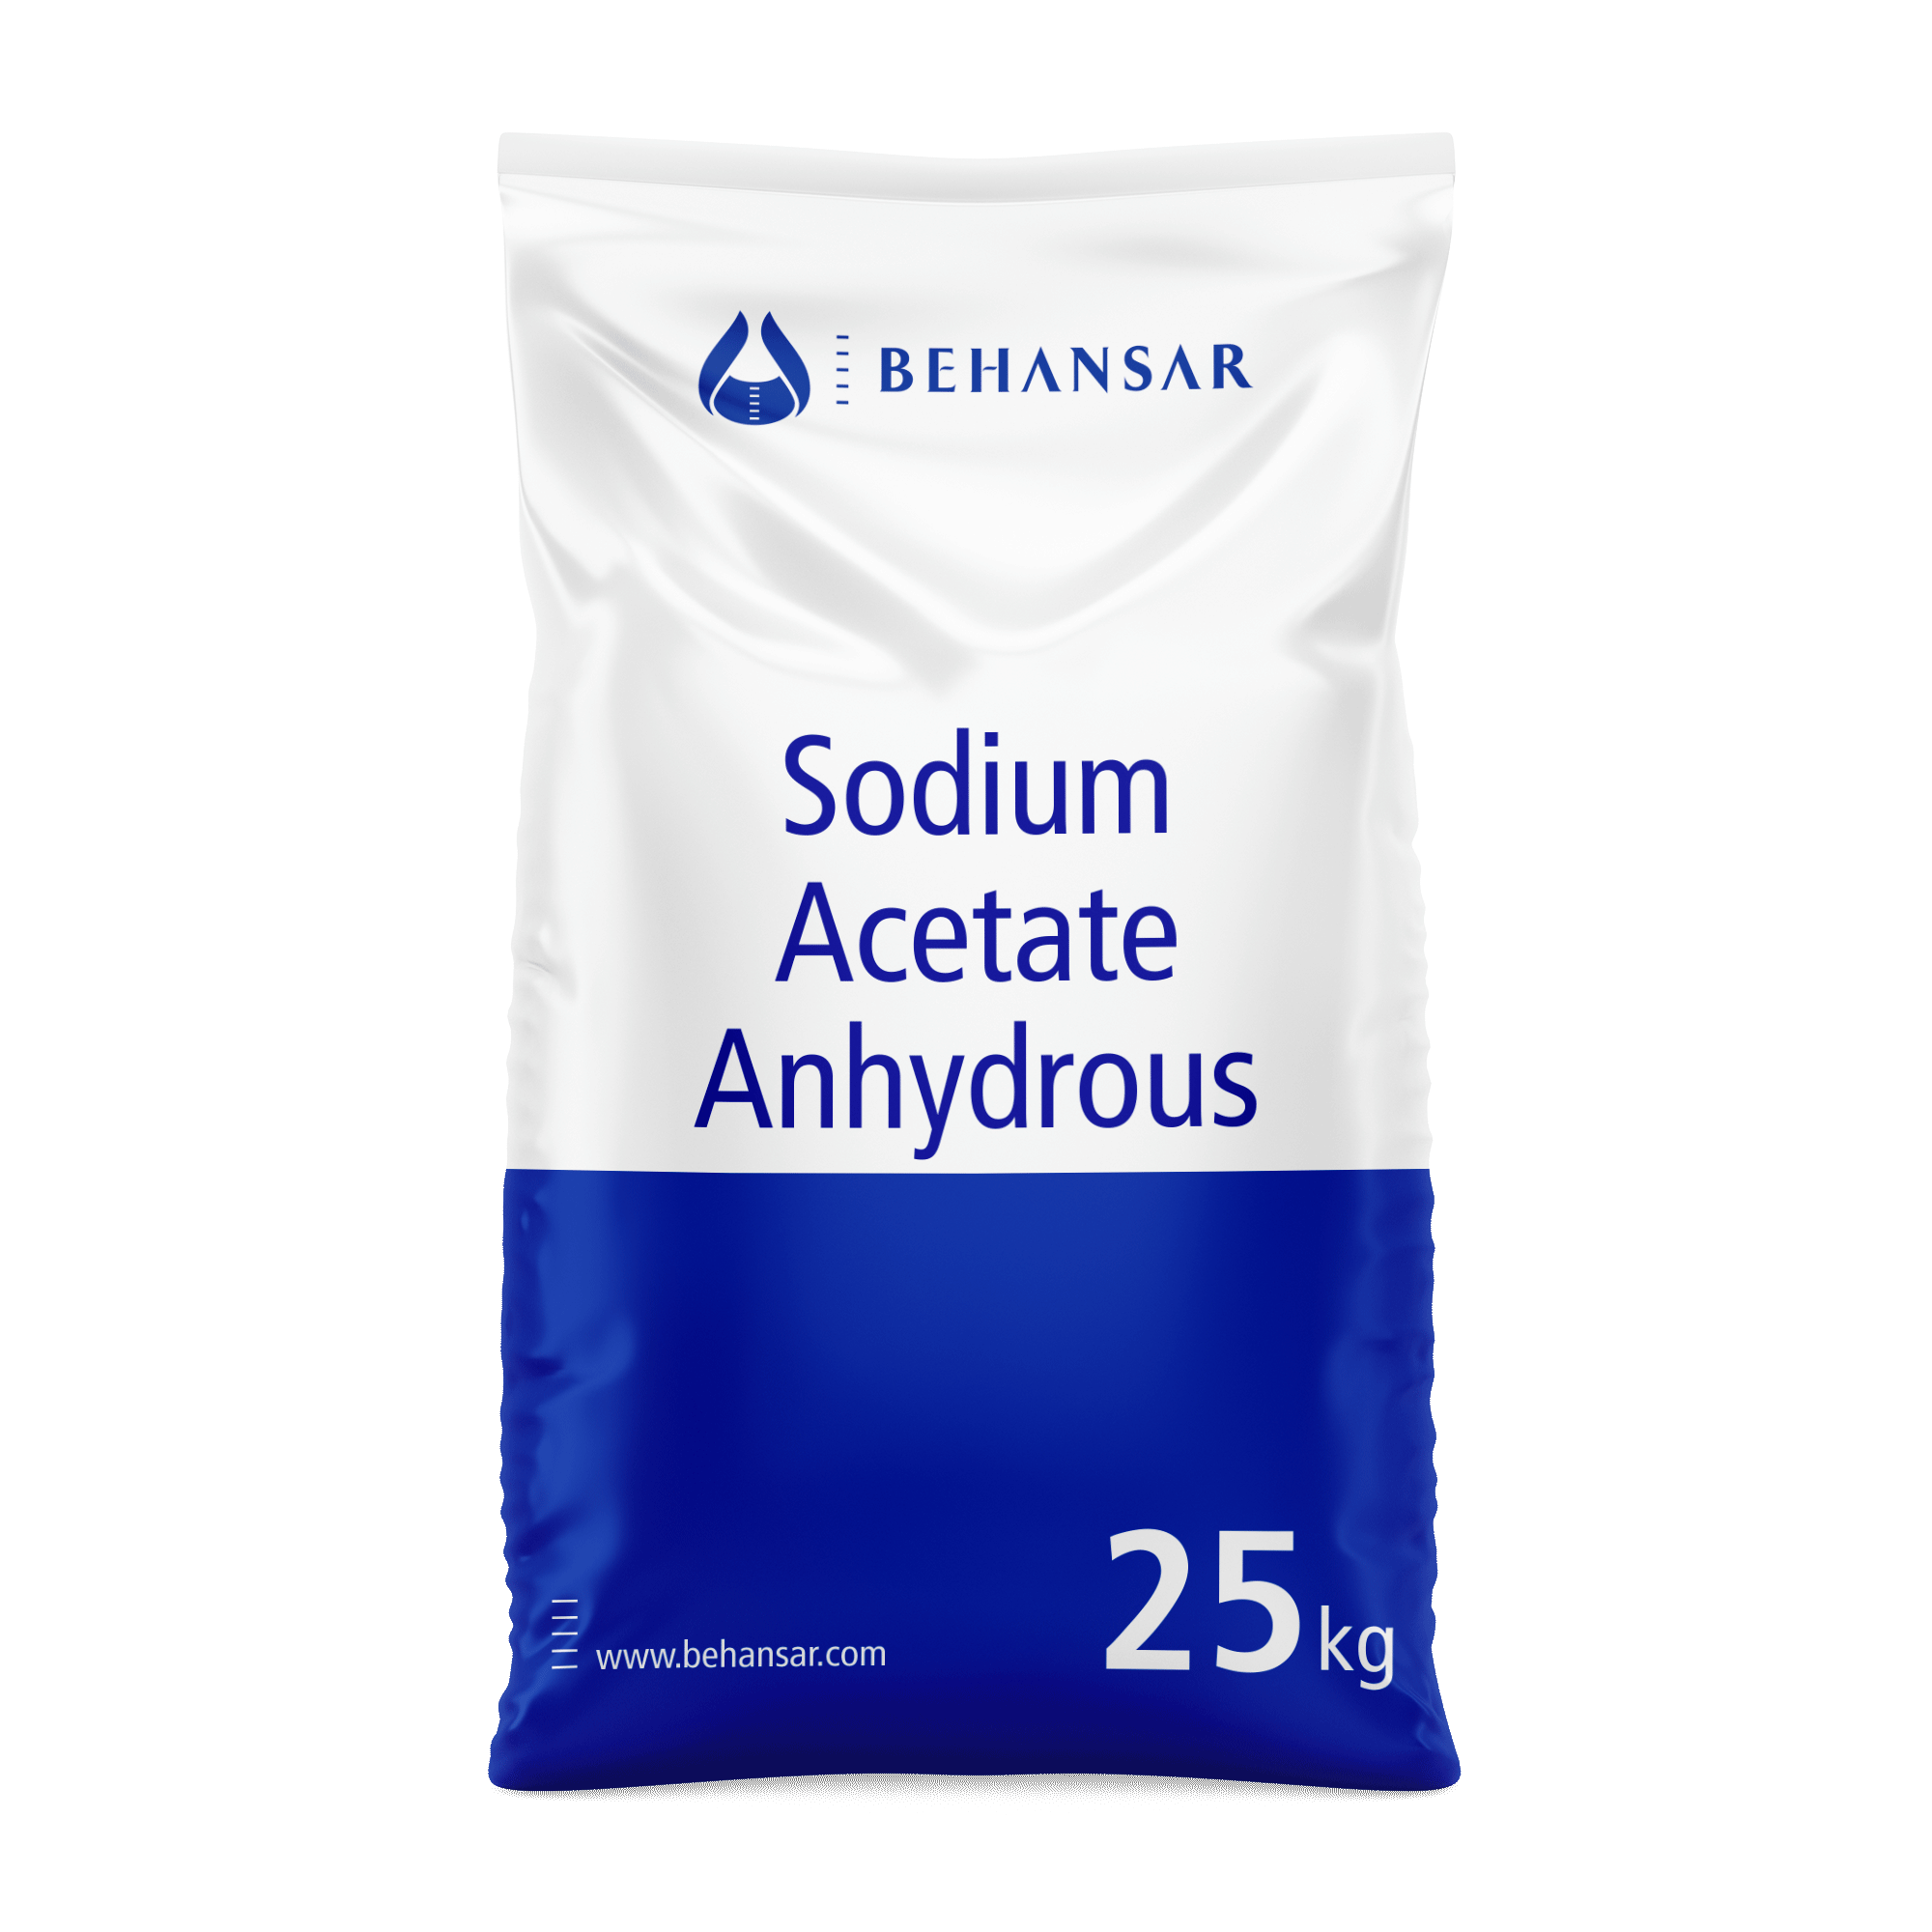 Sodium Acetate Anhydrous is one of the products of Behansar Co